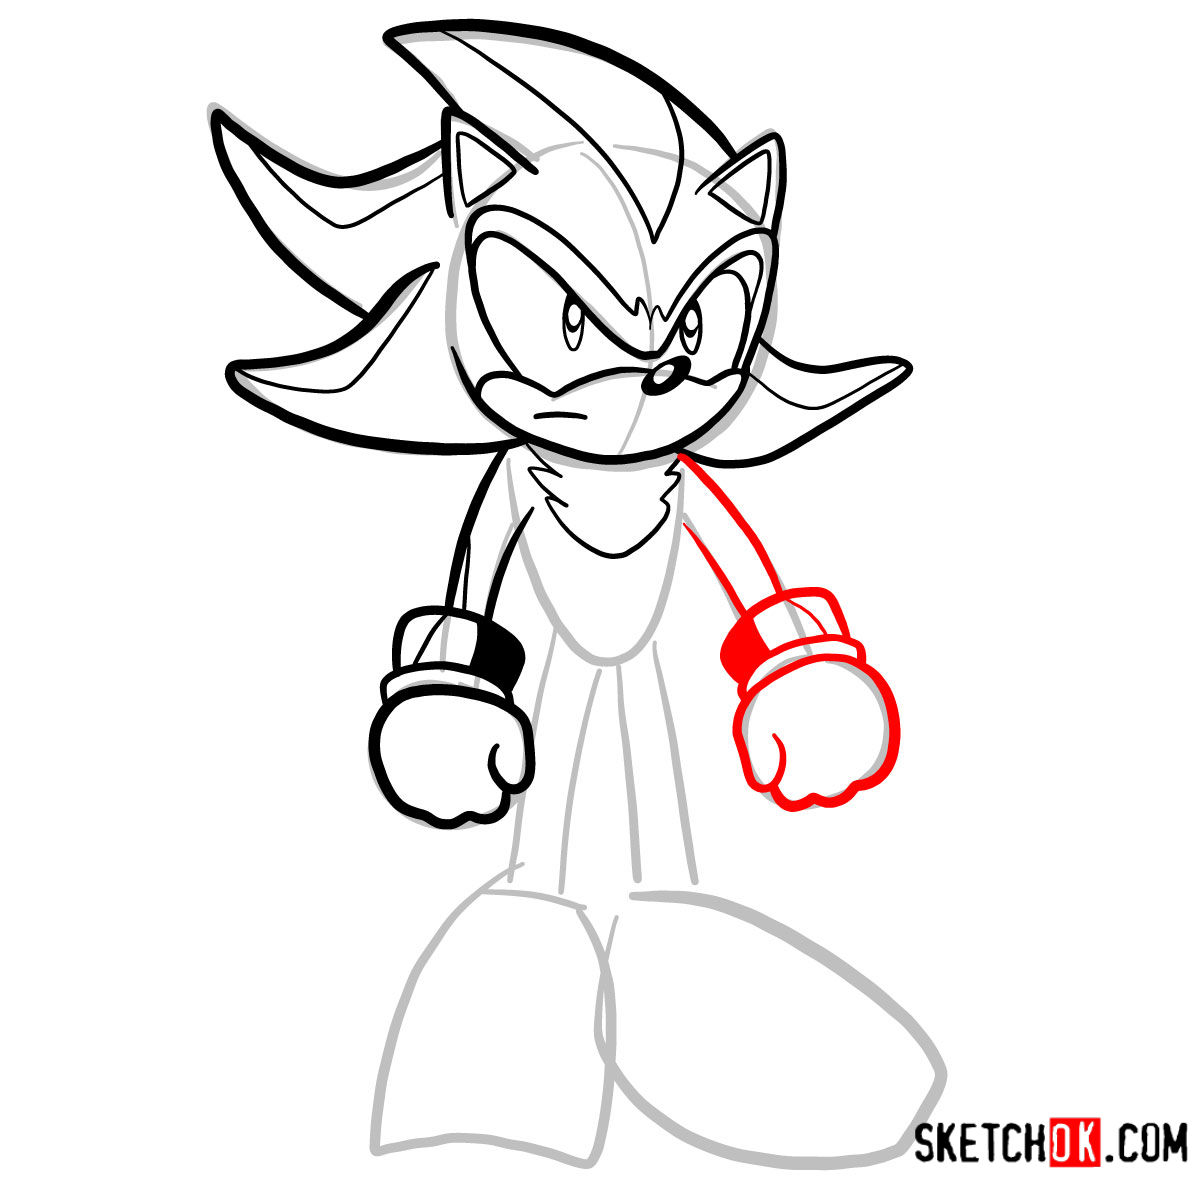 How to draw Shadow the Hedgehog - step 08